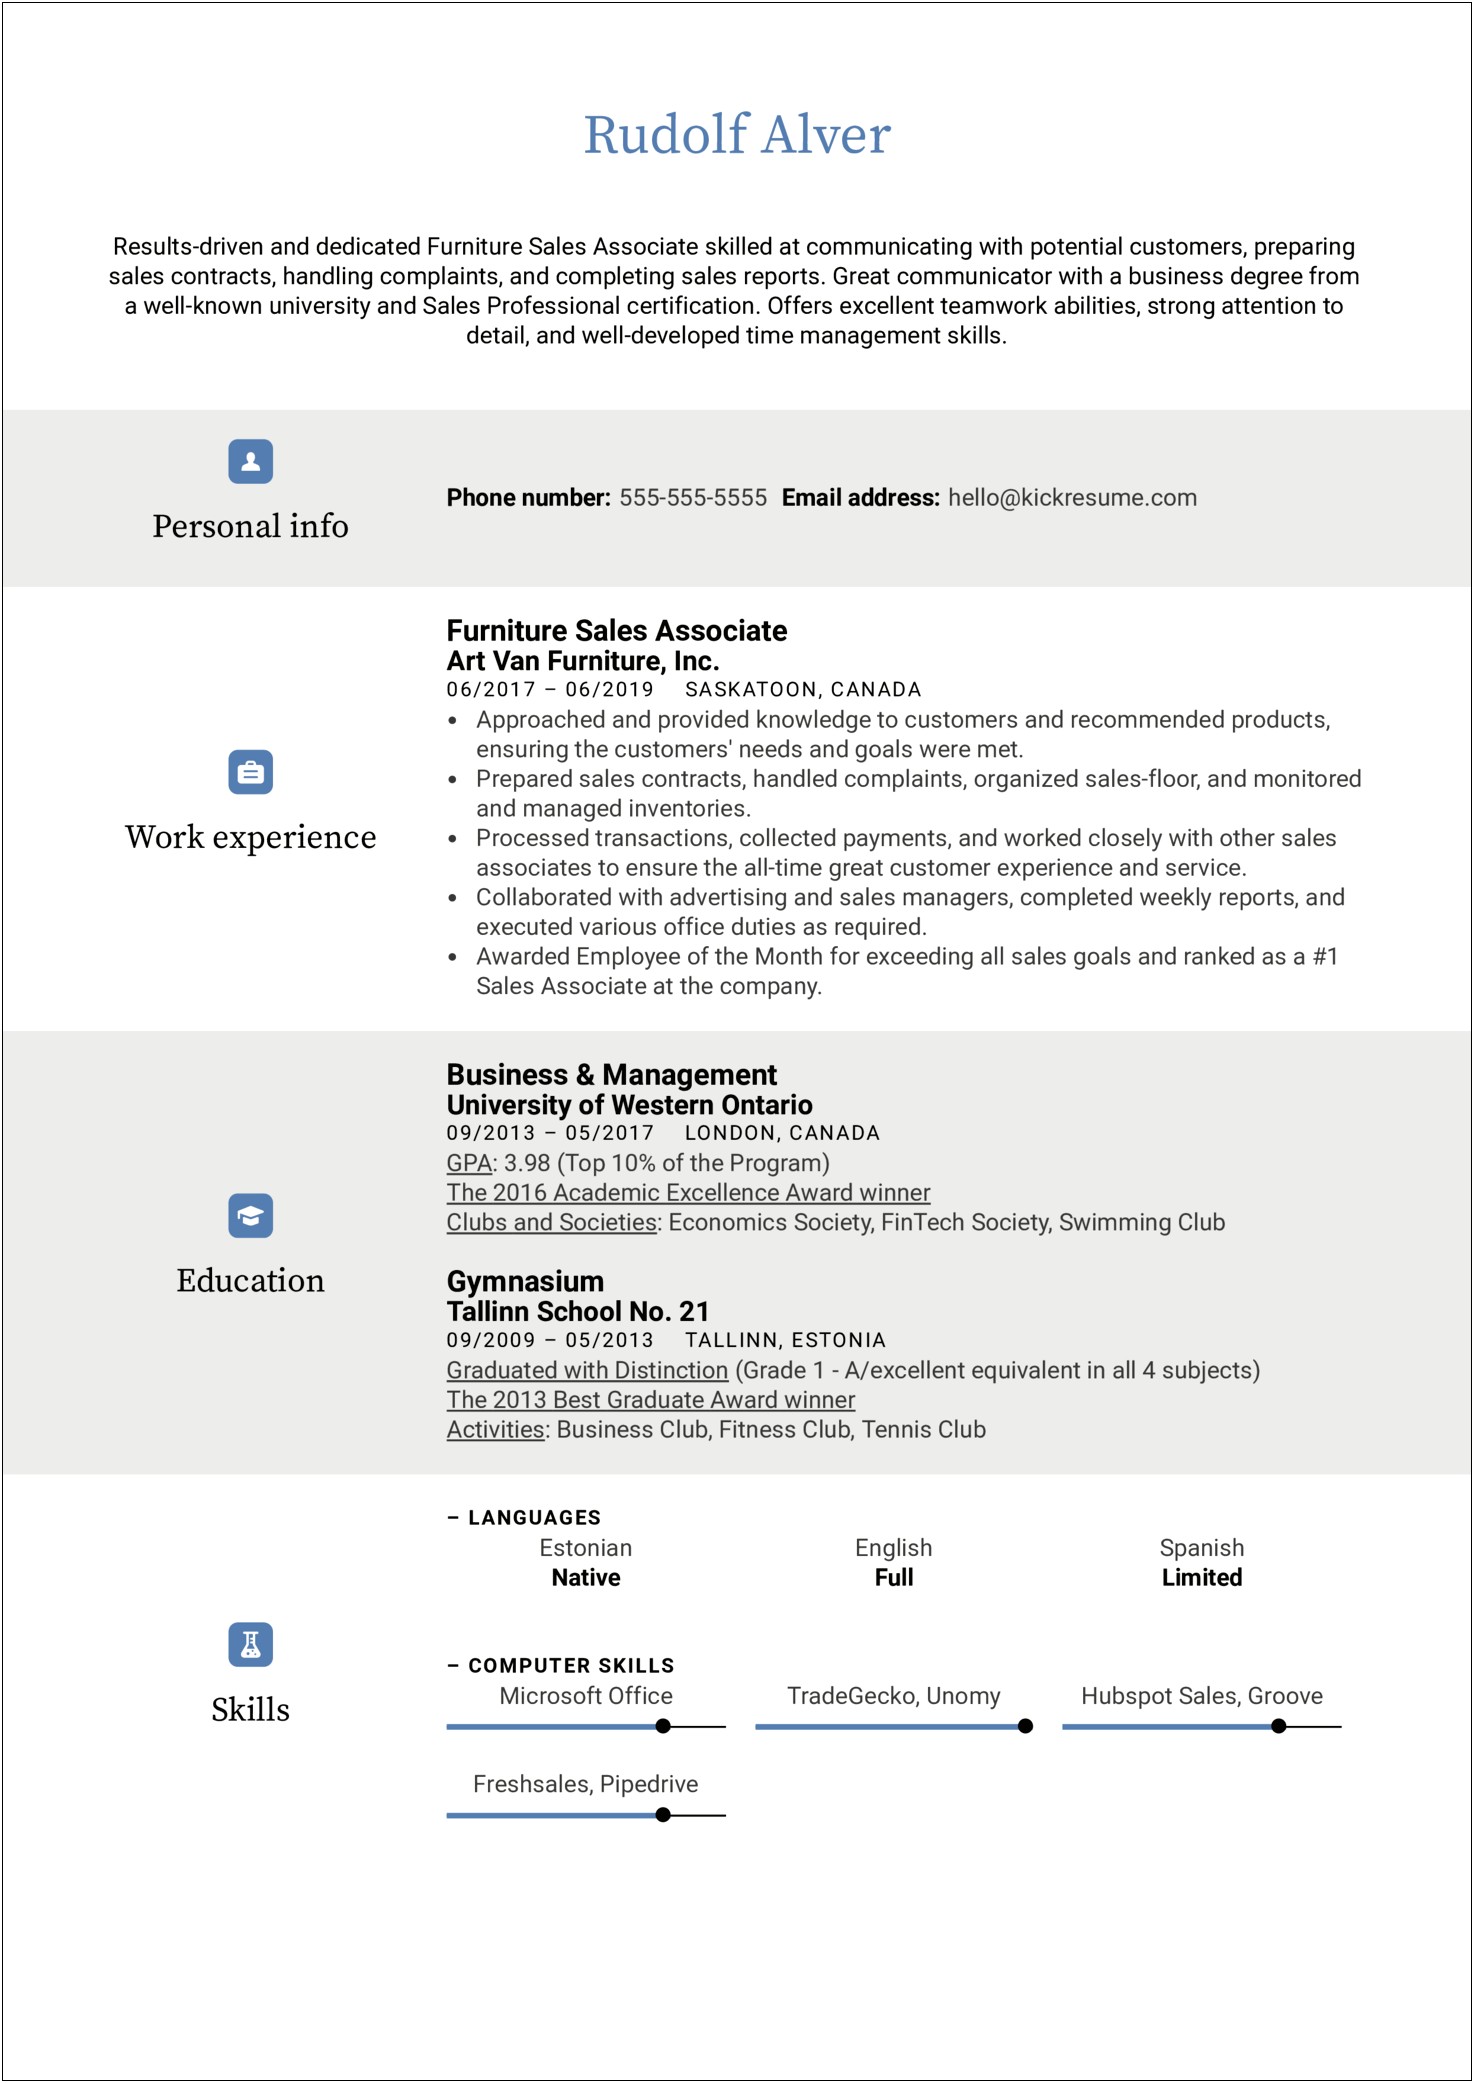 Resume To Work At A Furniture Store